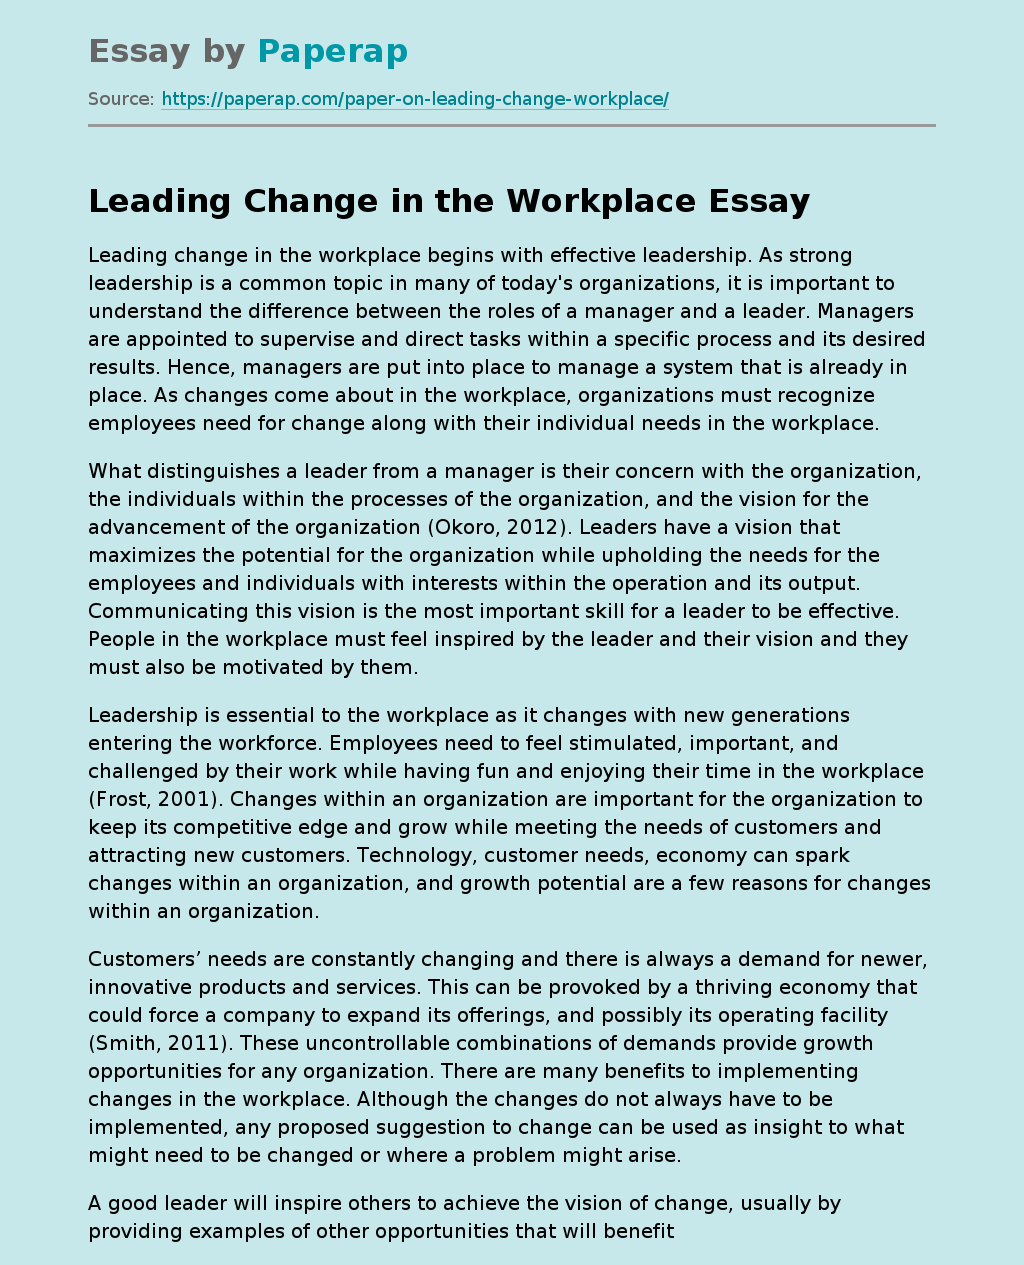 Leading Change in the Workplace